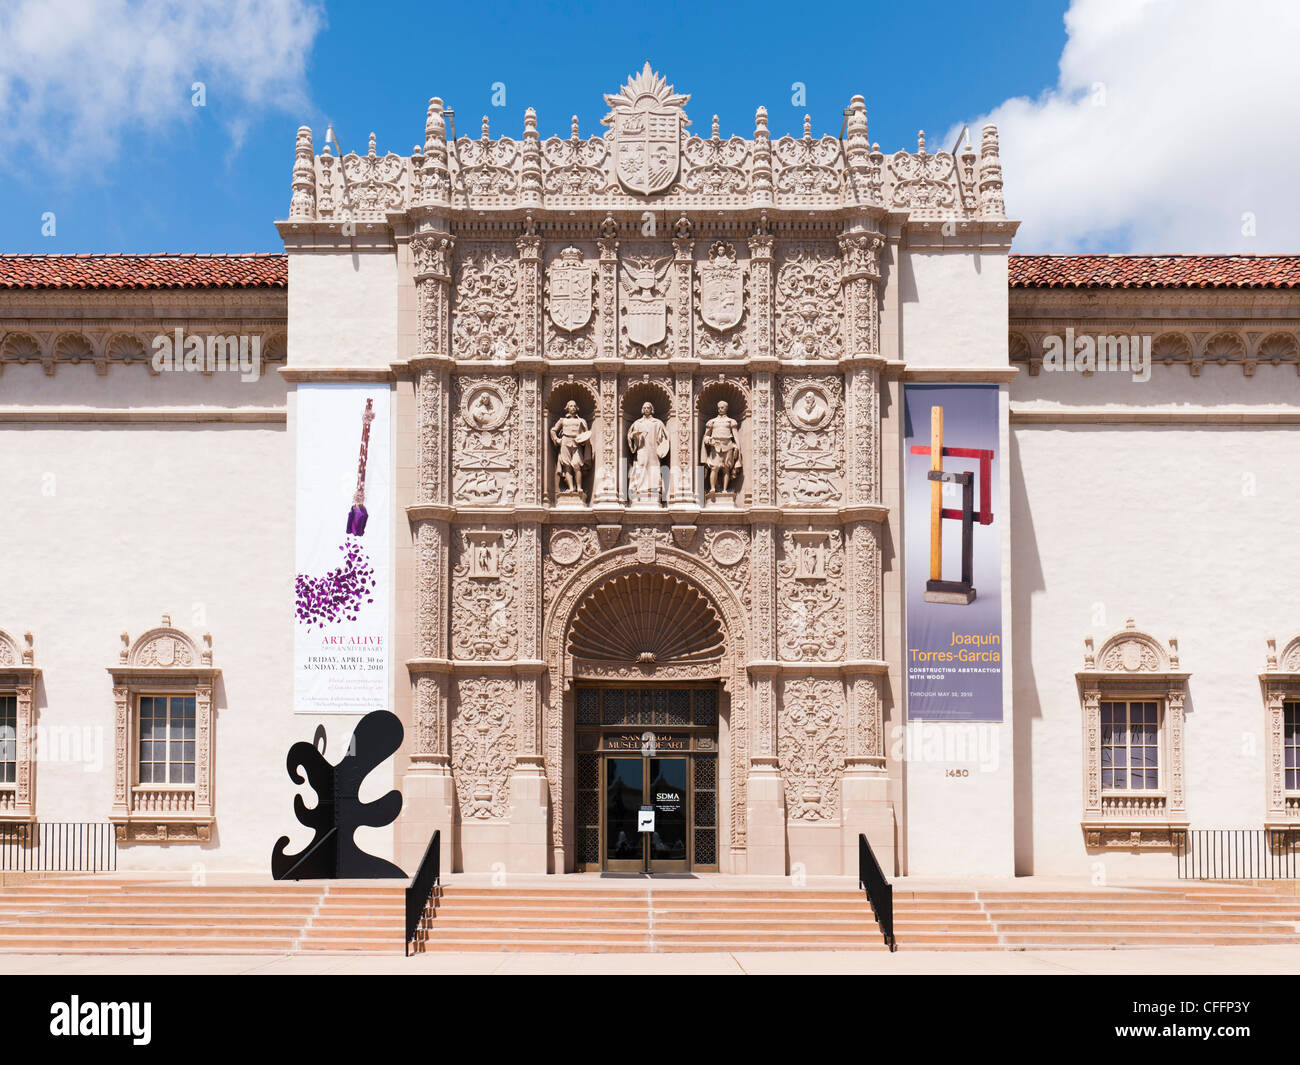 San Diego Museum of Art Banque D'Images